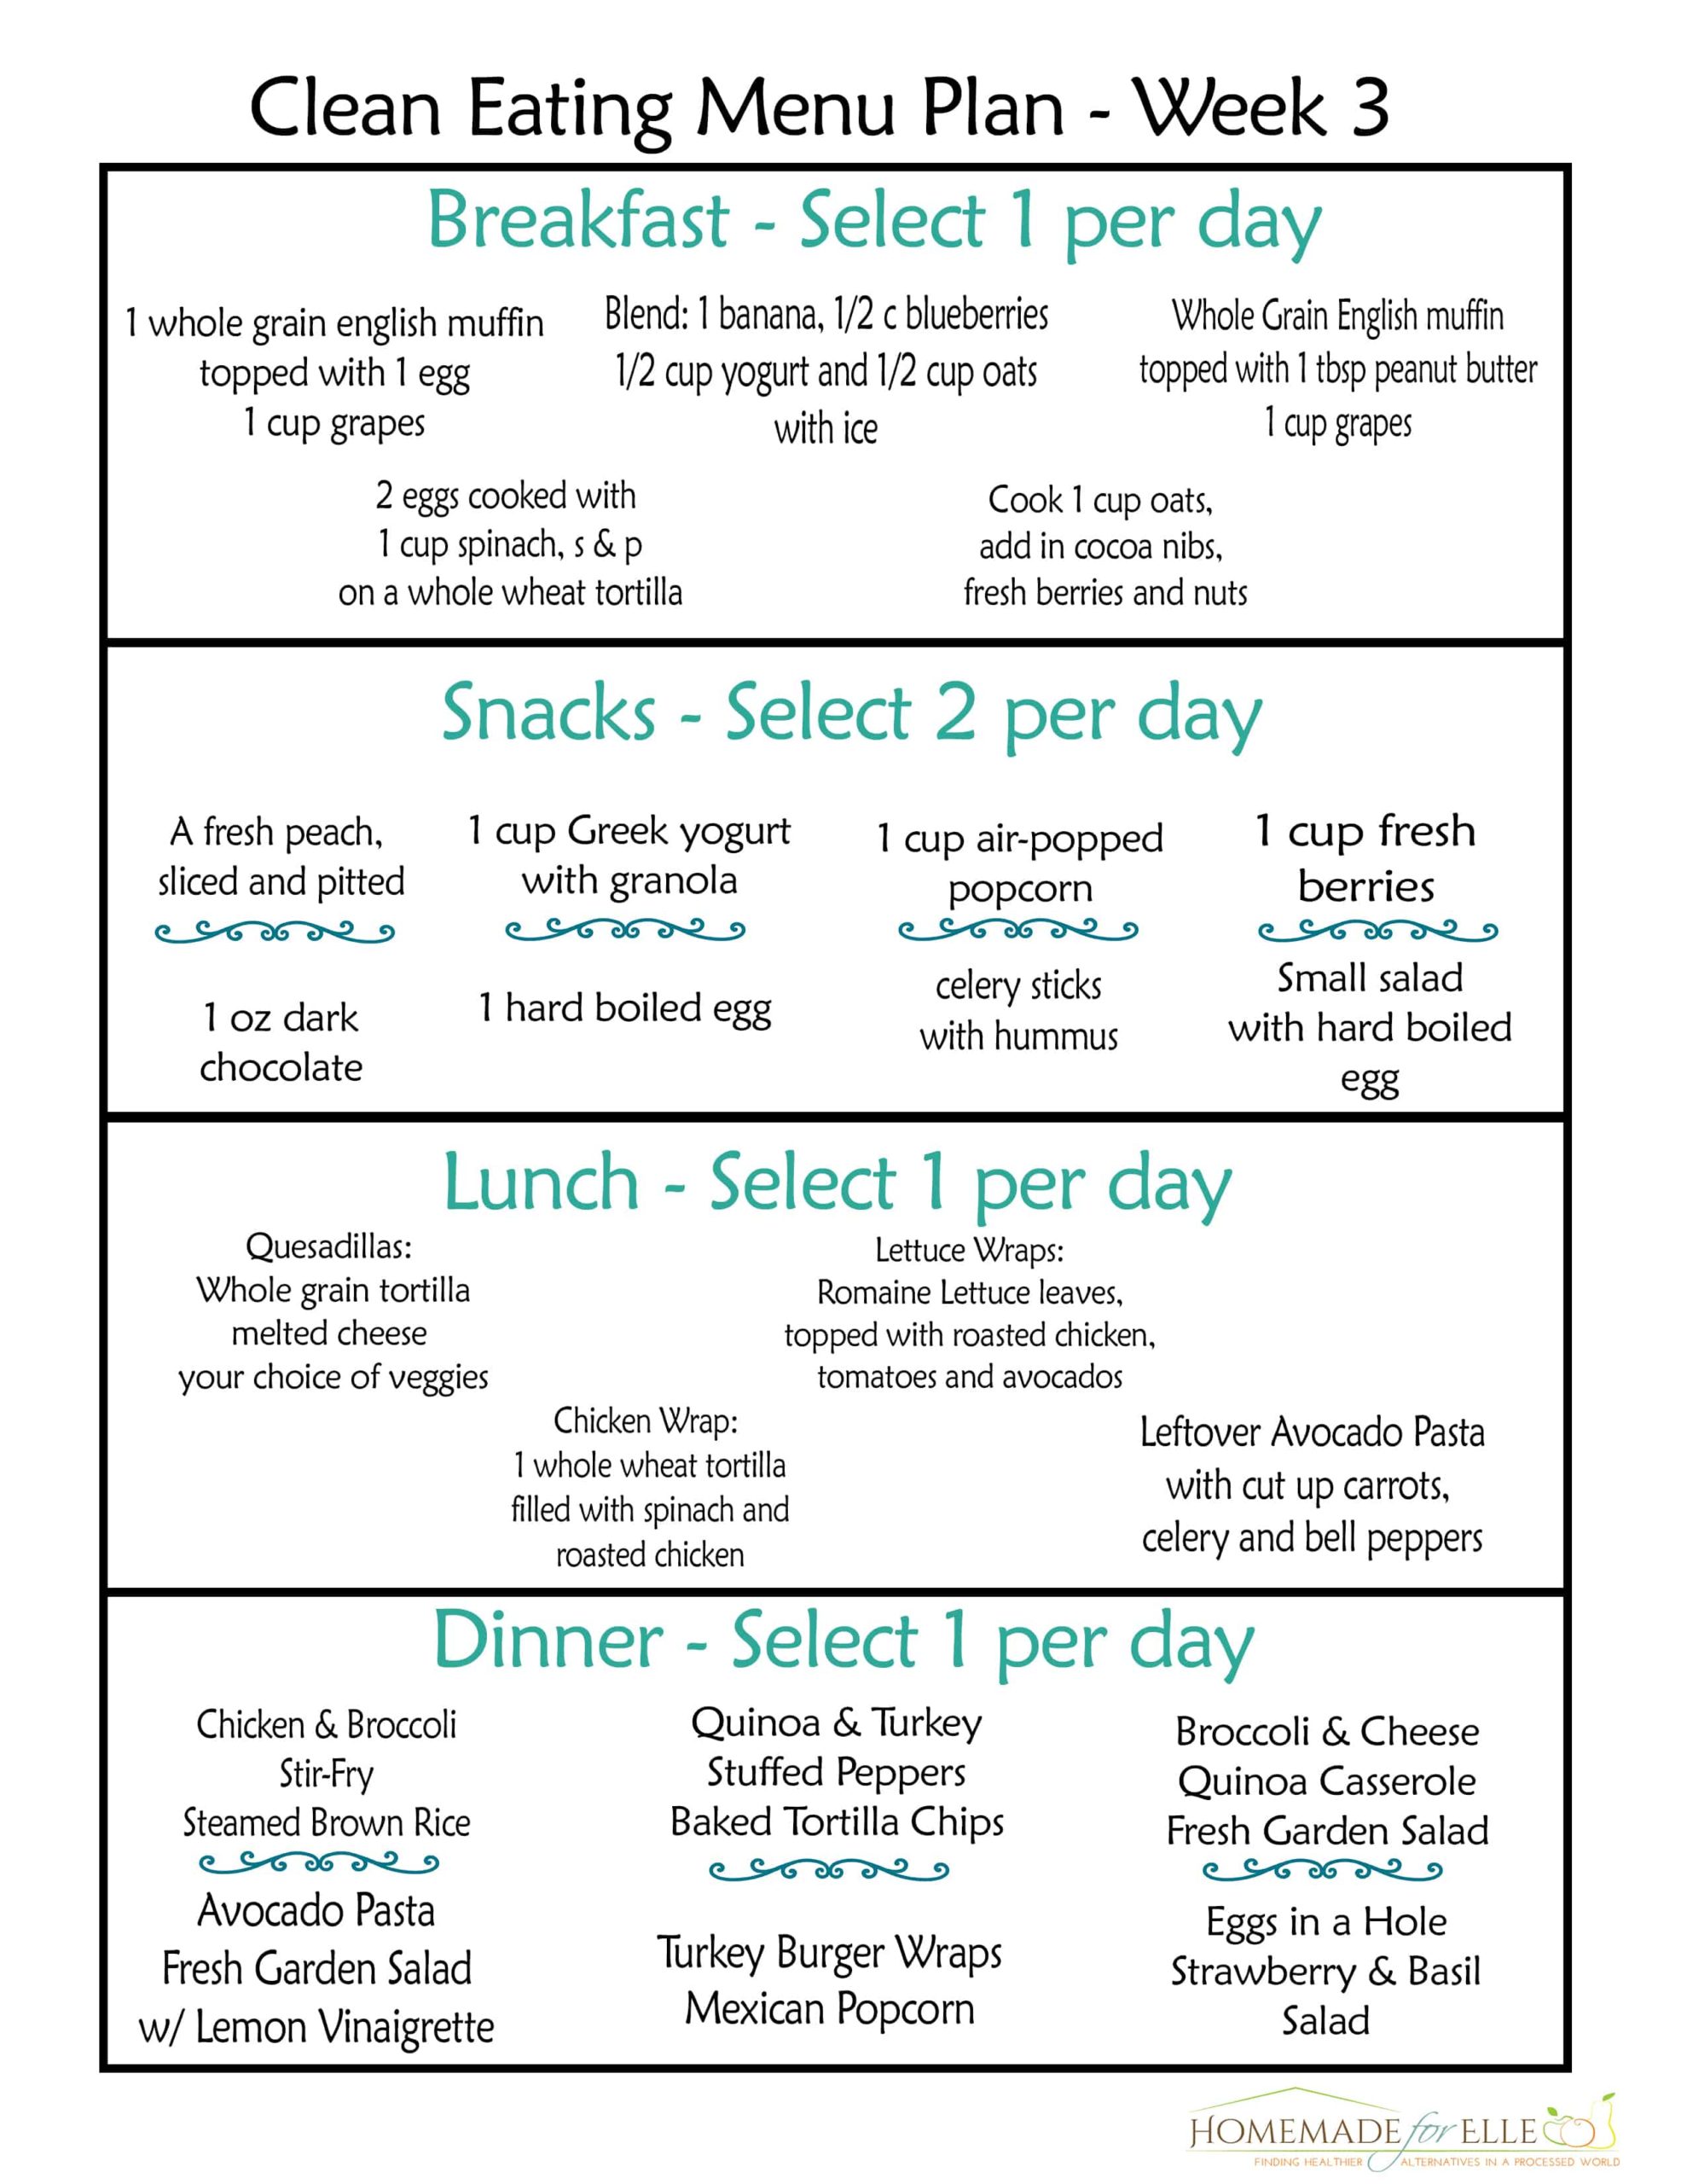 Clean Eating Meal Plan Pdf {With Recipes Your Family Will Love!} ⋆ Homemade  For Elle